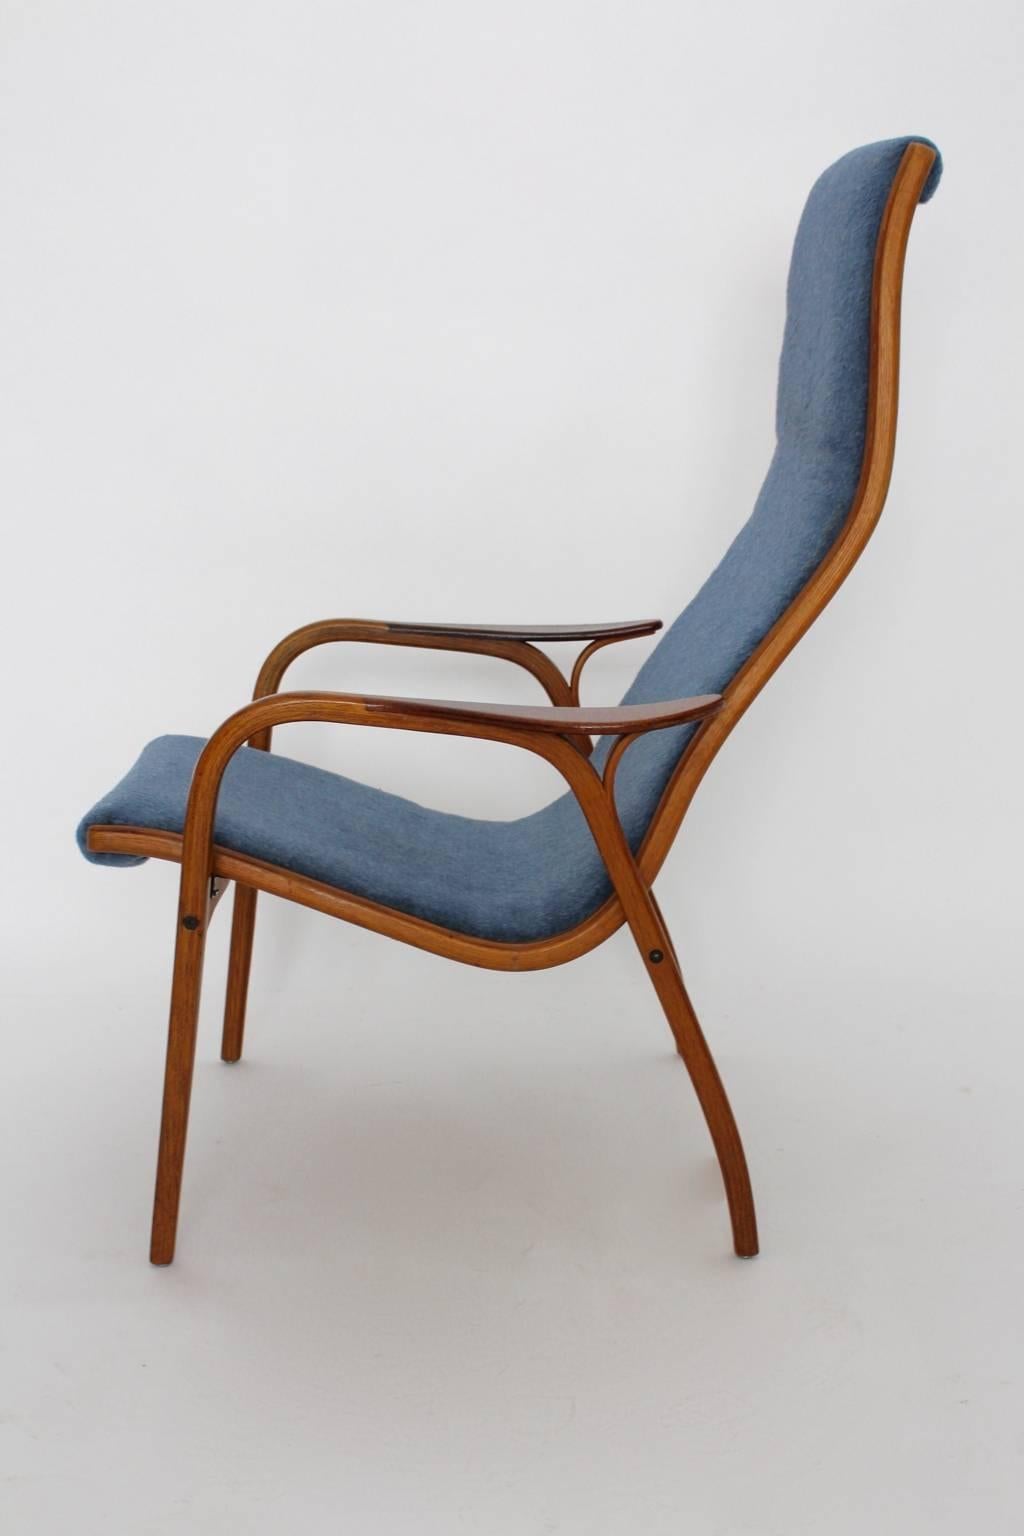 Lightweight lounge chair, which was designed by Yngve Ekström, 1950s and produced by Swedese, Sweden.

The seat frame of the lounge chair was made of teakwood and the seat shell was covered with sky blue woolen fabric.

The lounge chair is in very